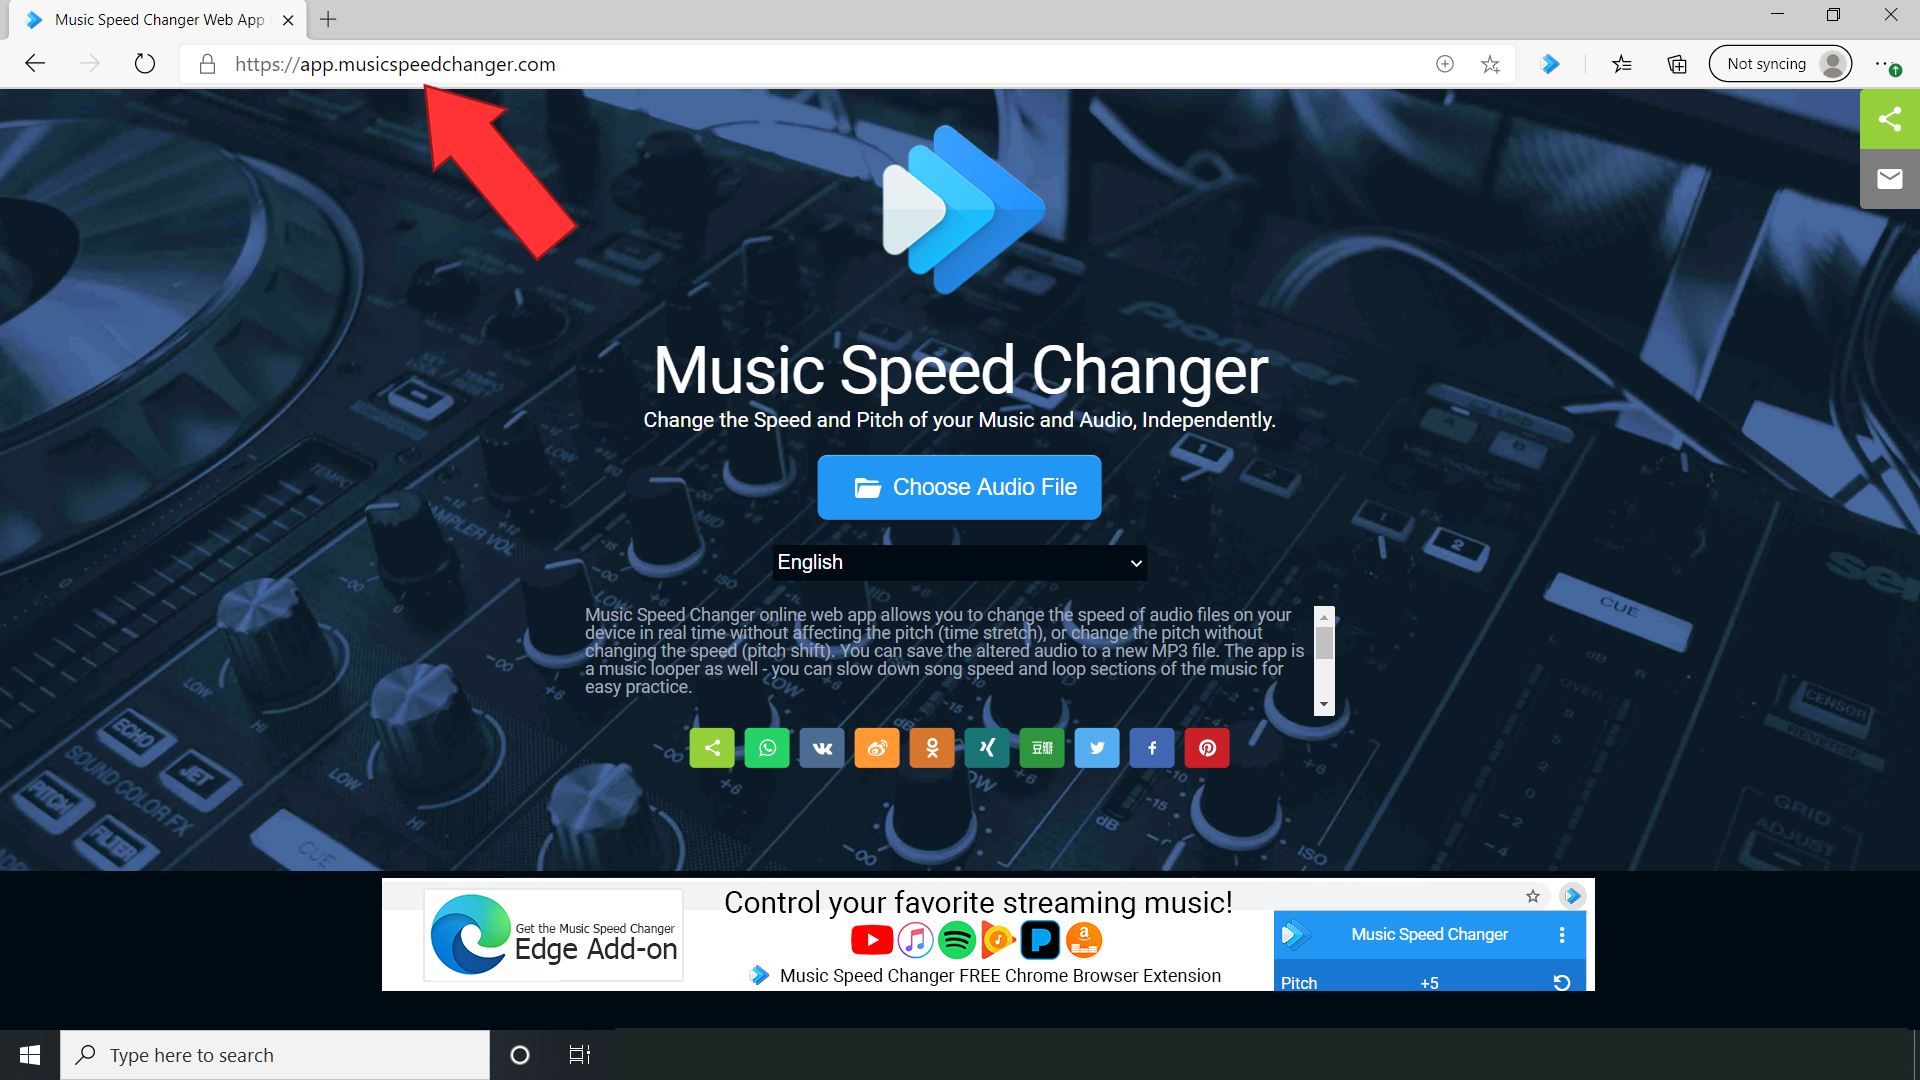 Go to the Music Speed Changer Web App